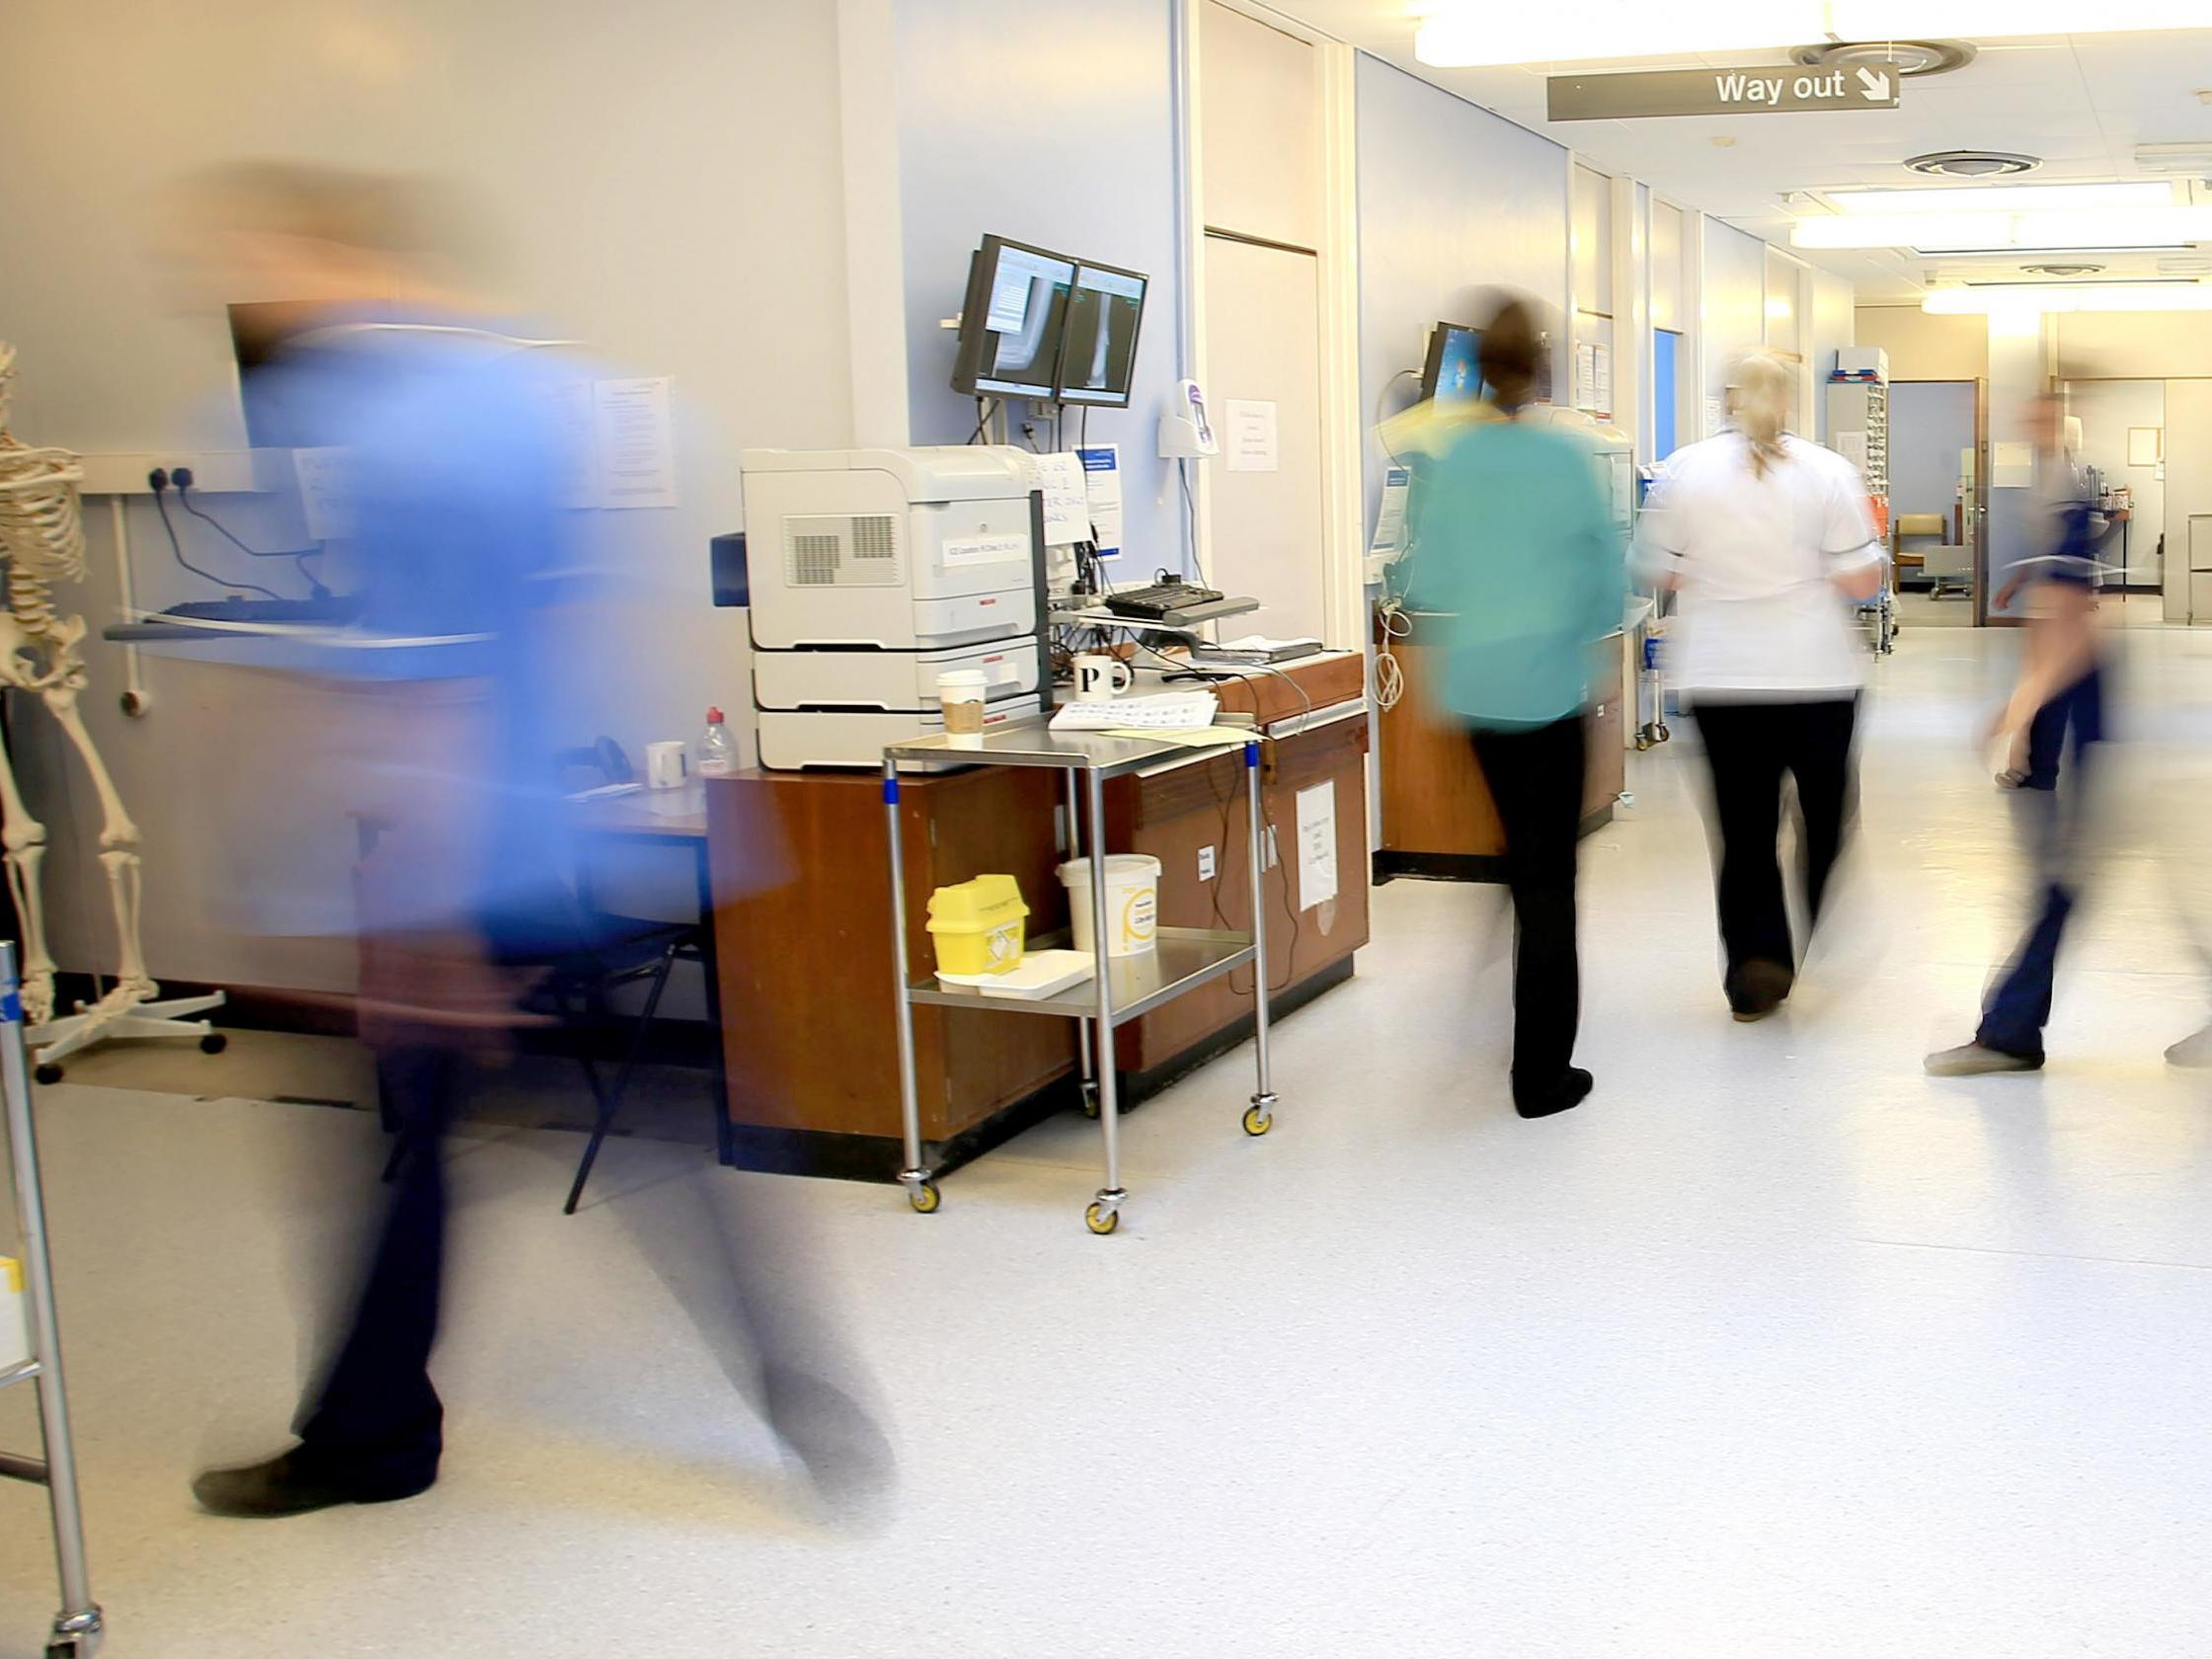 The results of the survey of staff from from 94% of hospitals in the UK and Ireland casts concern over care for staff in the NHS